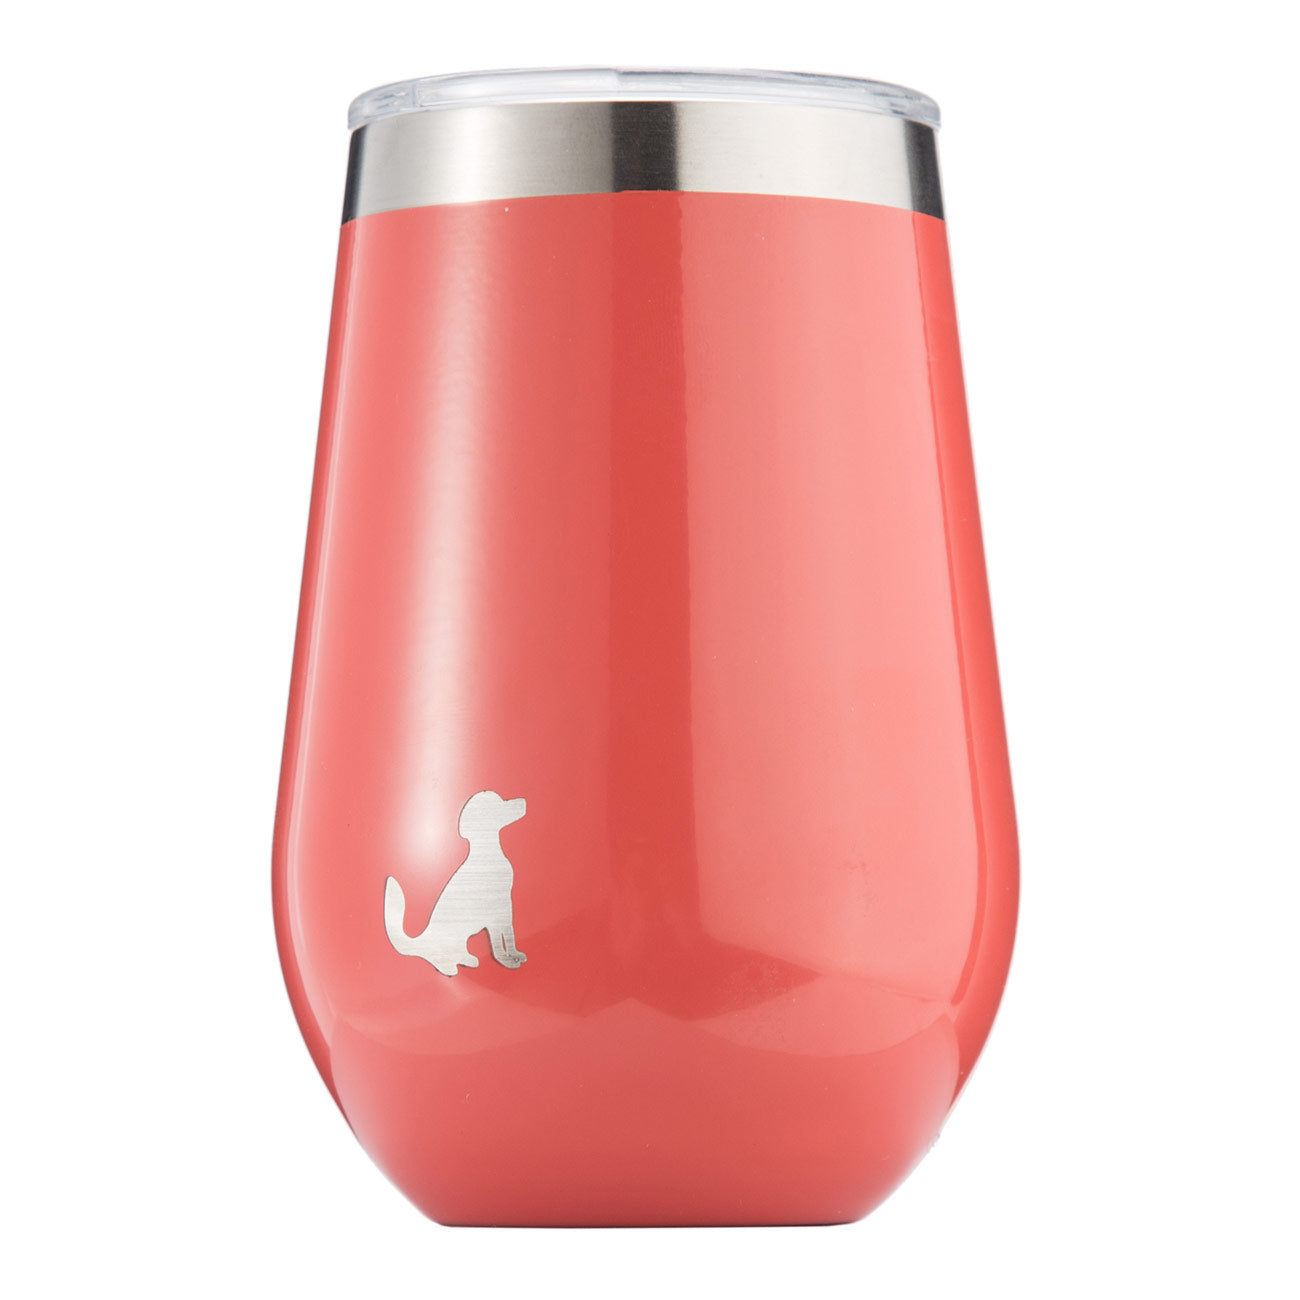 12oz Wine Tumbler With Lid - Wine Red